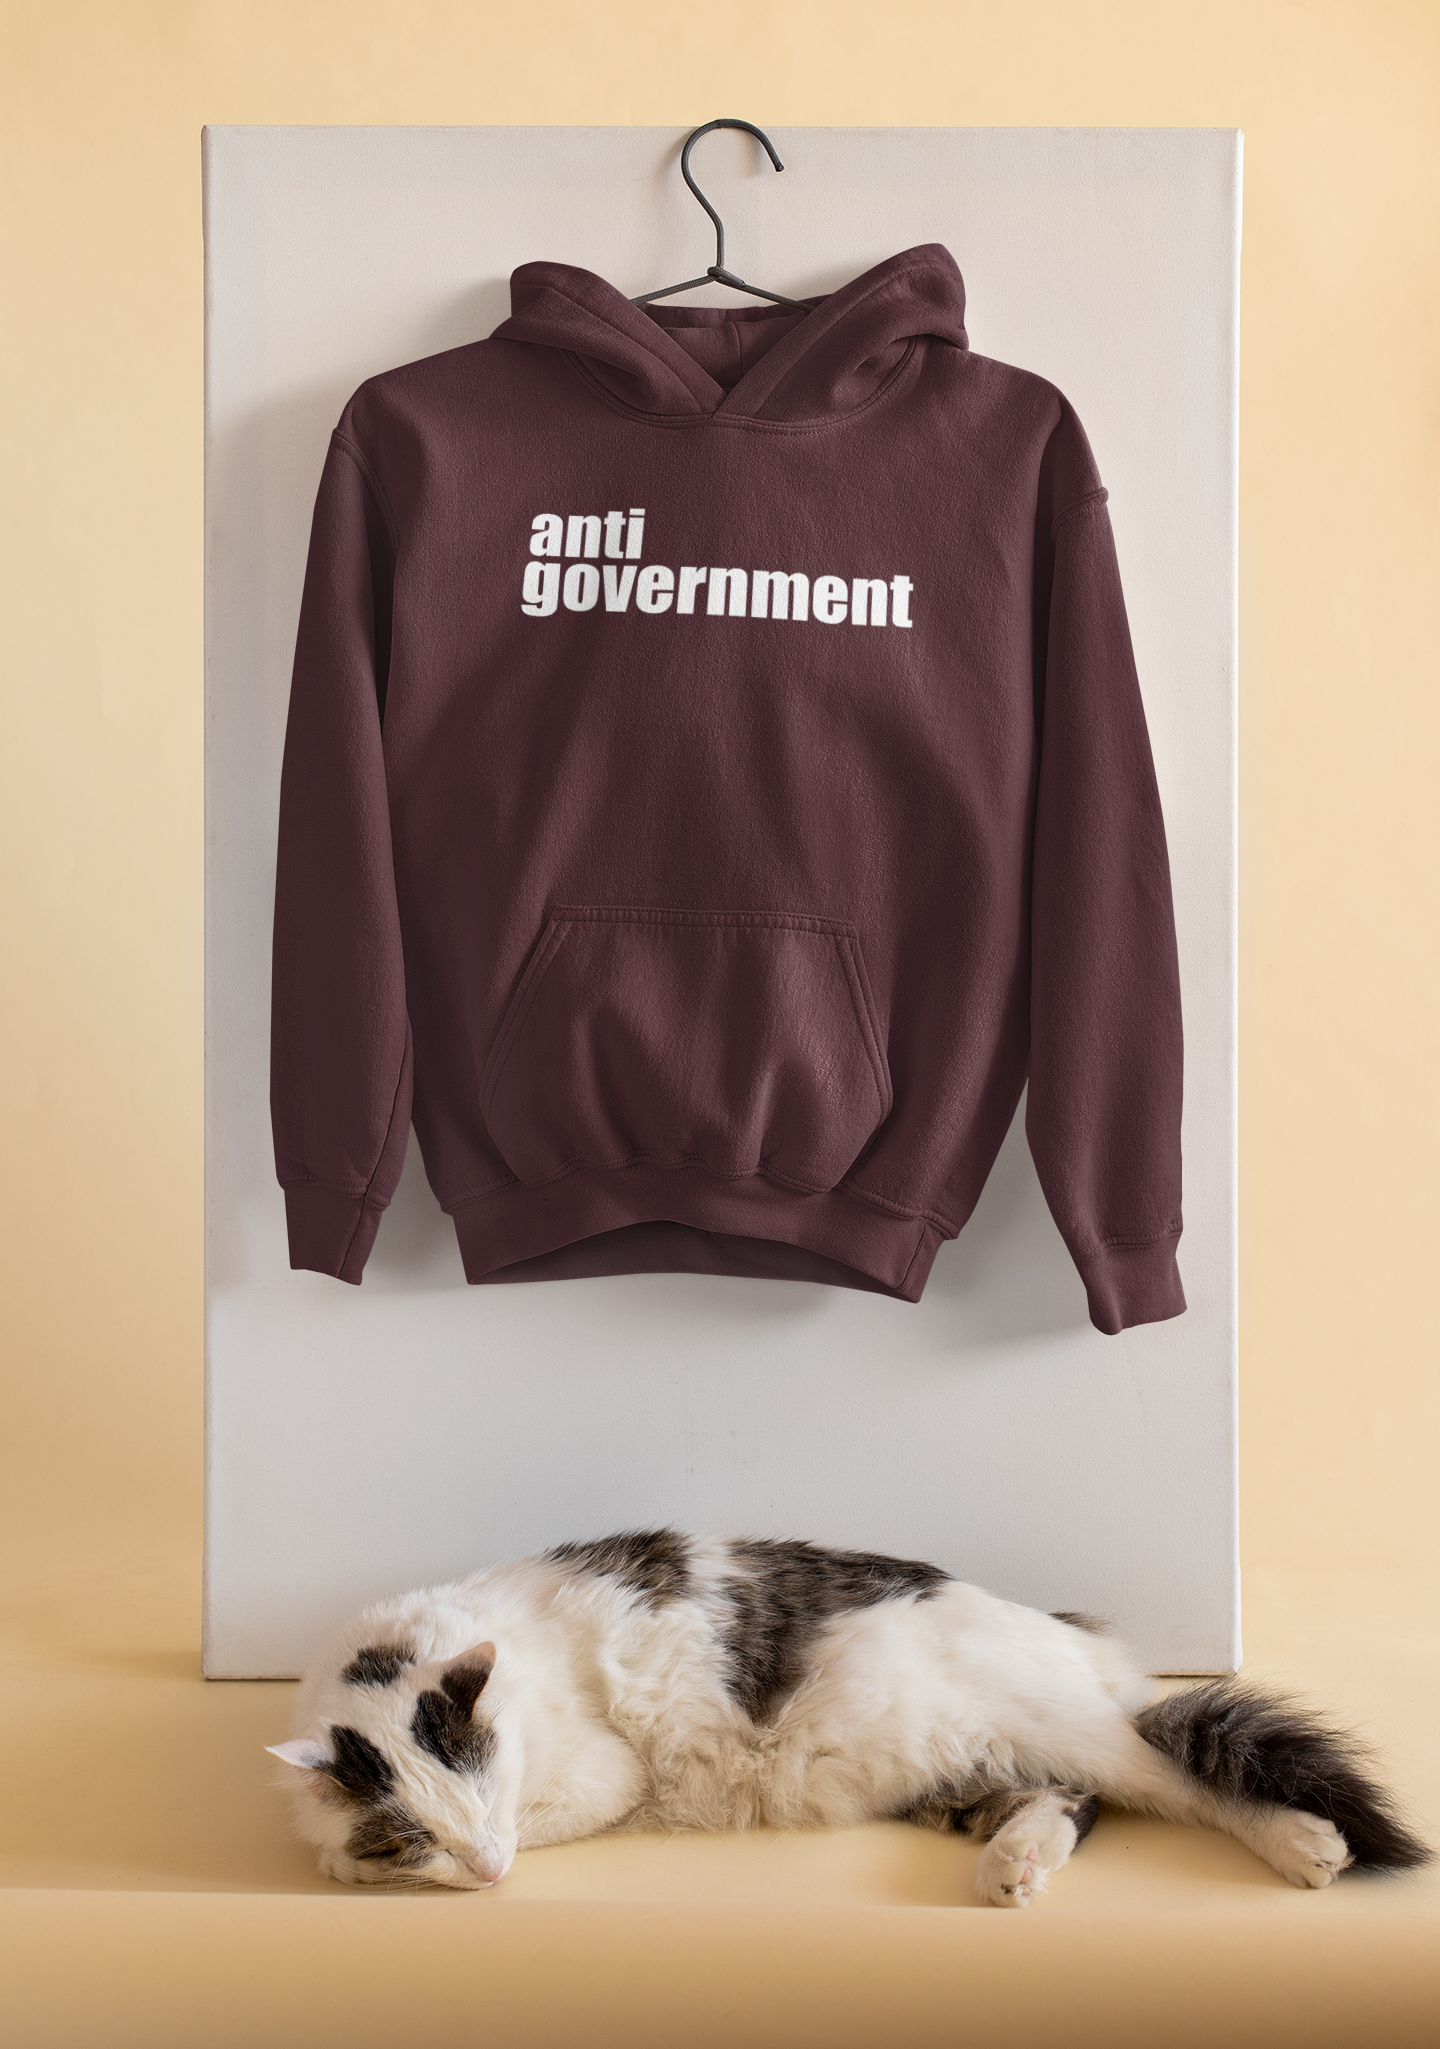 Government Anti Government Hoodies for Women-FunkyTeesClub